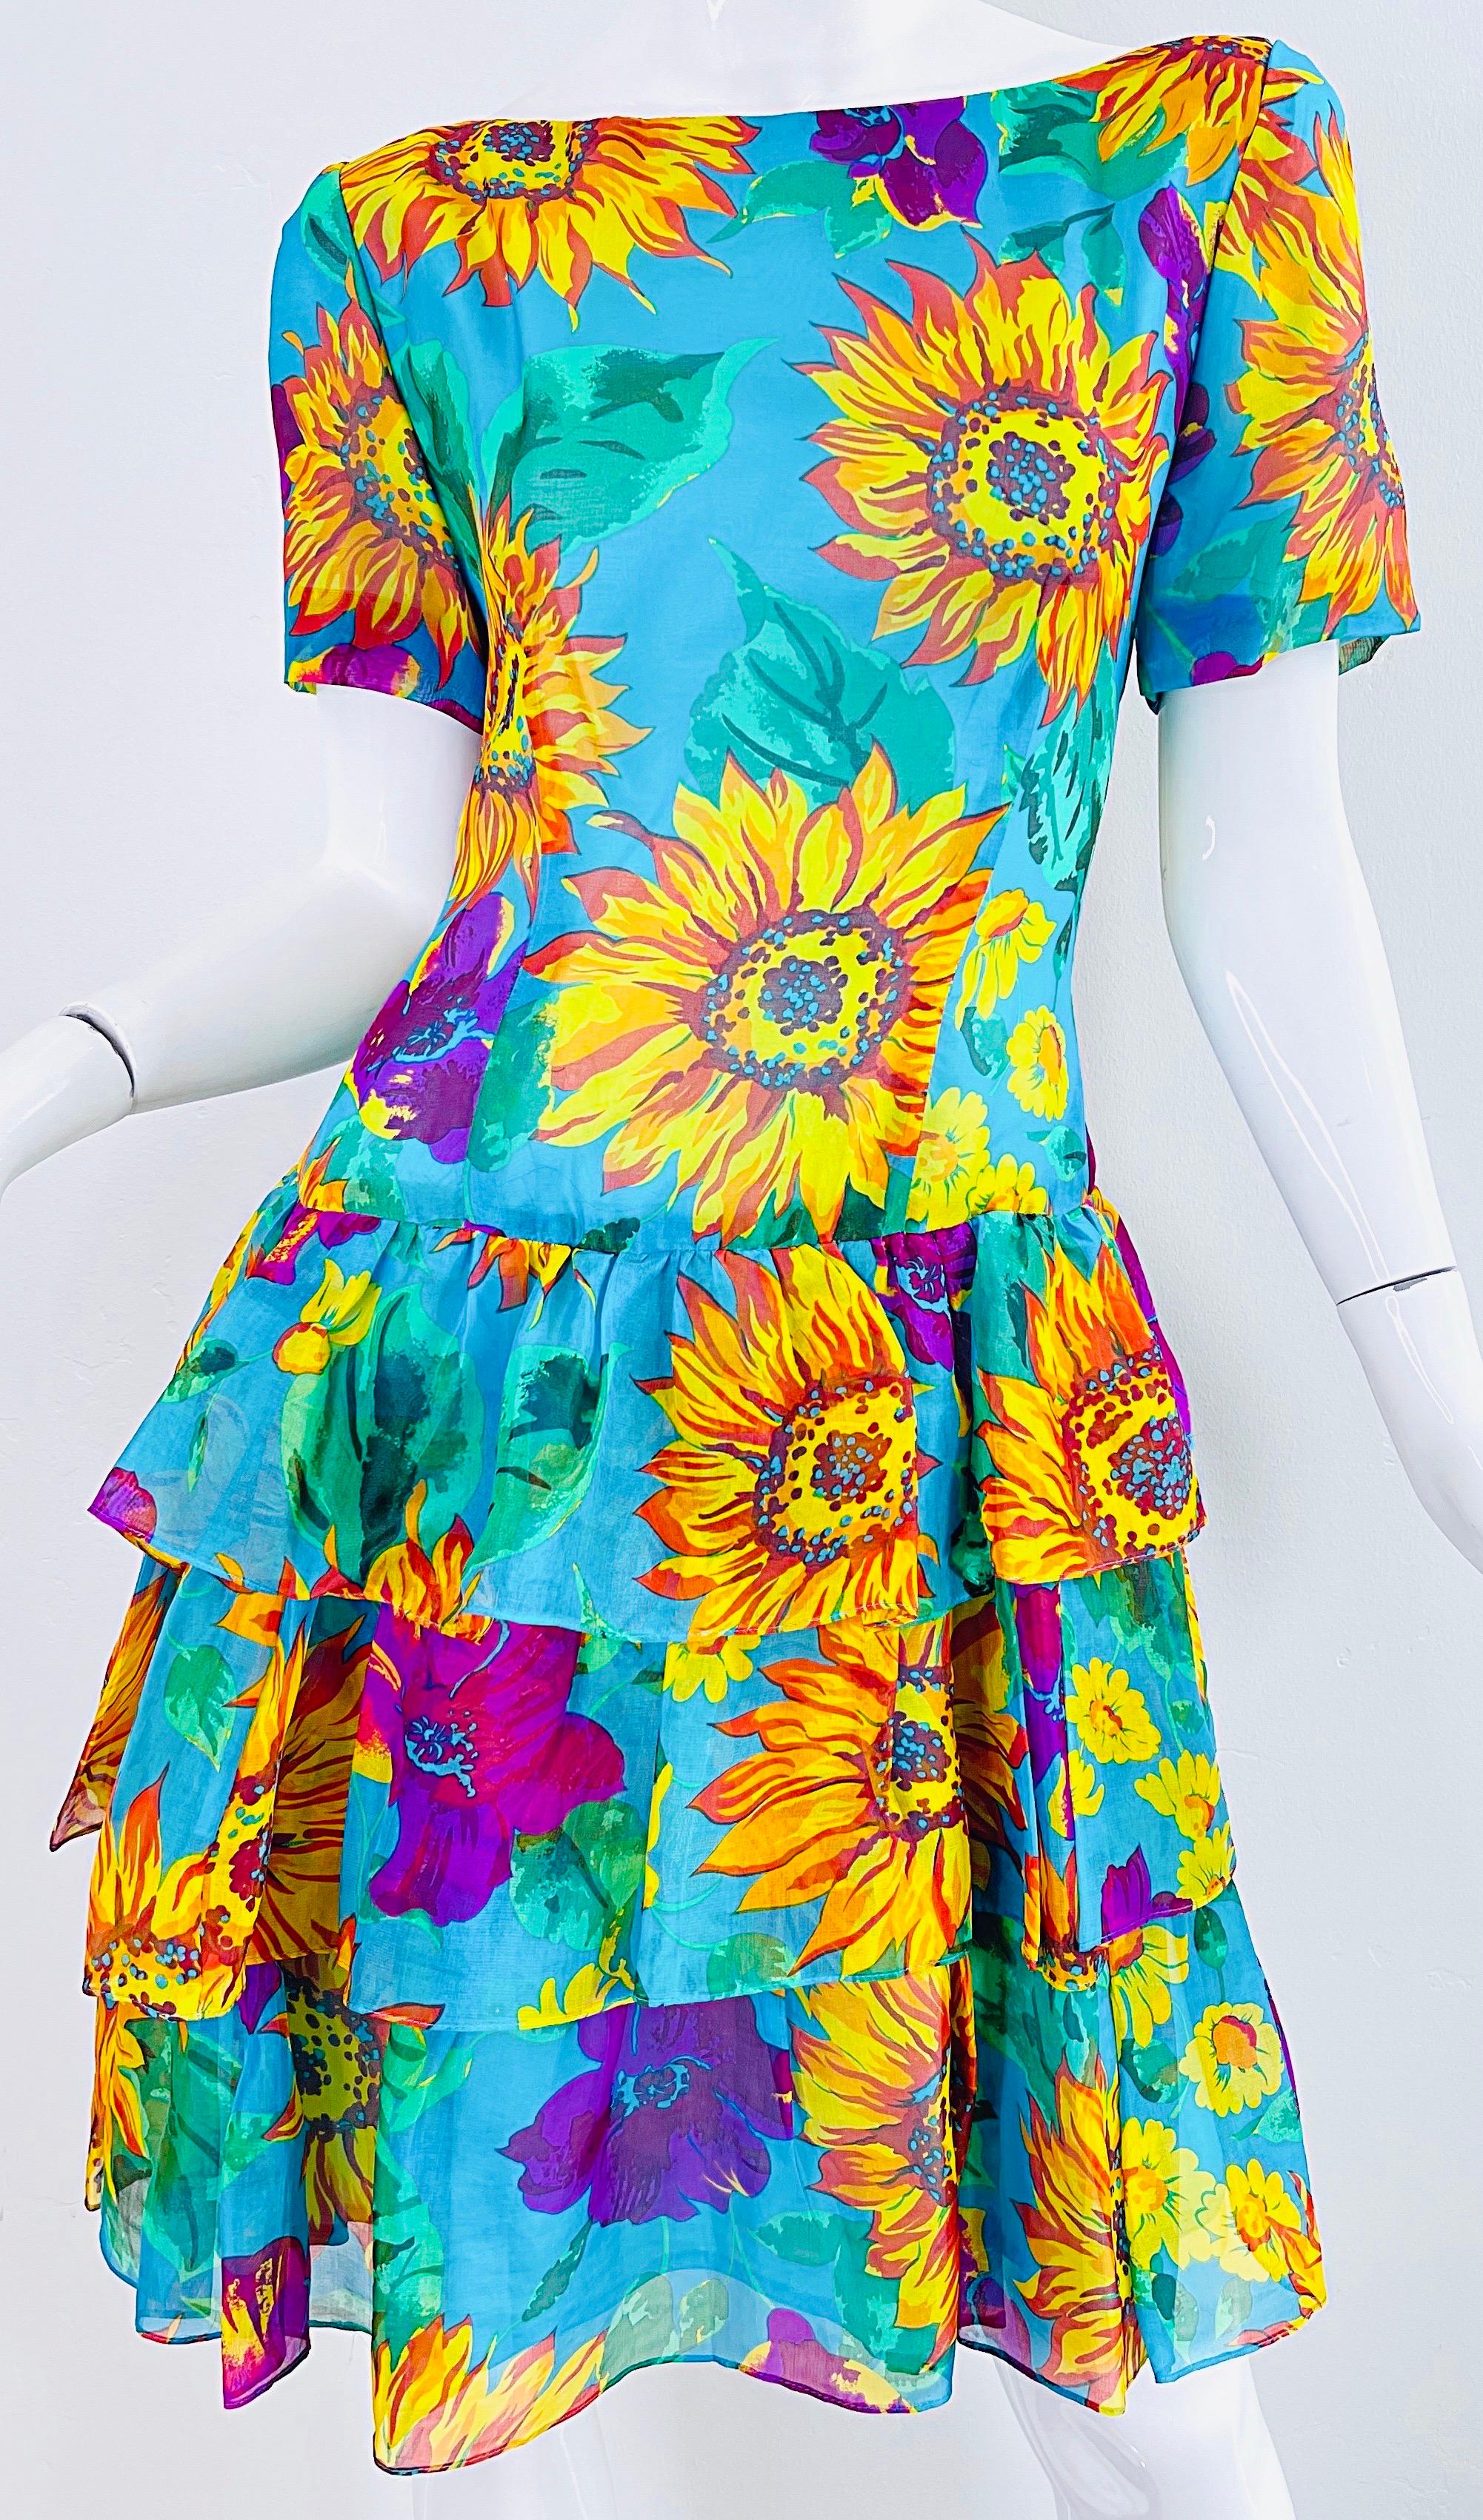 Chic 1980s Silk Chiffon Size 8 / 10 Sunflower Print Turquoise Vintage 80s Dress For Sale 3